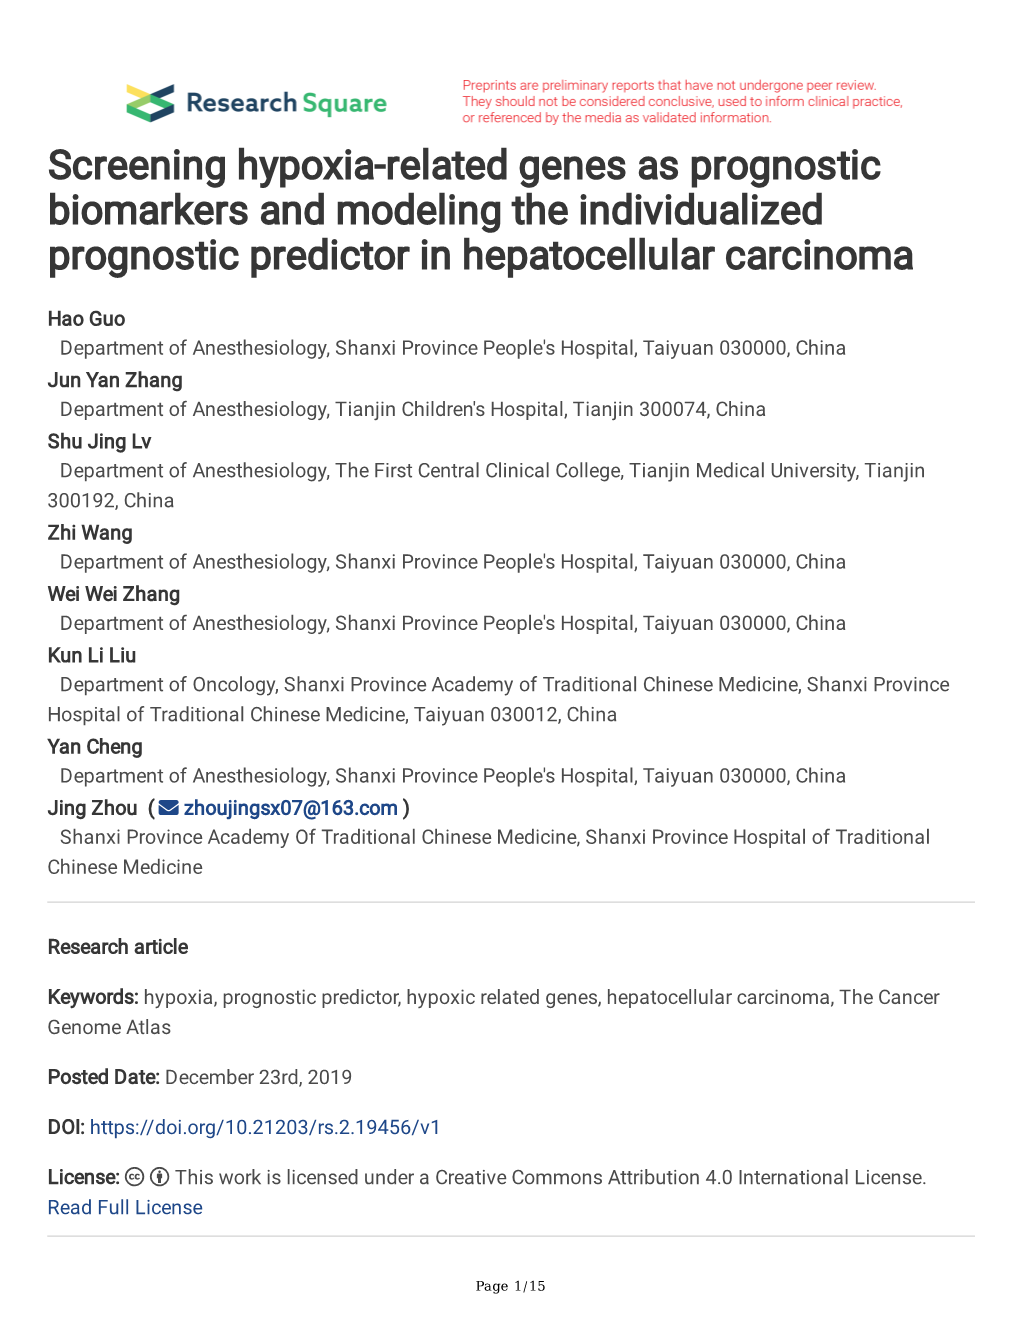 Screening Hypoxia-Related Genes As Prognostic Biomarkers and Modeling the Individualized Prognostic Predictor in Hepatocellular Carcinoma